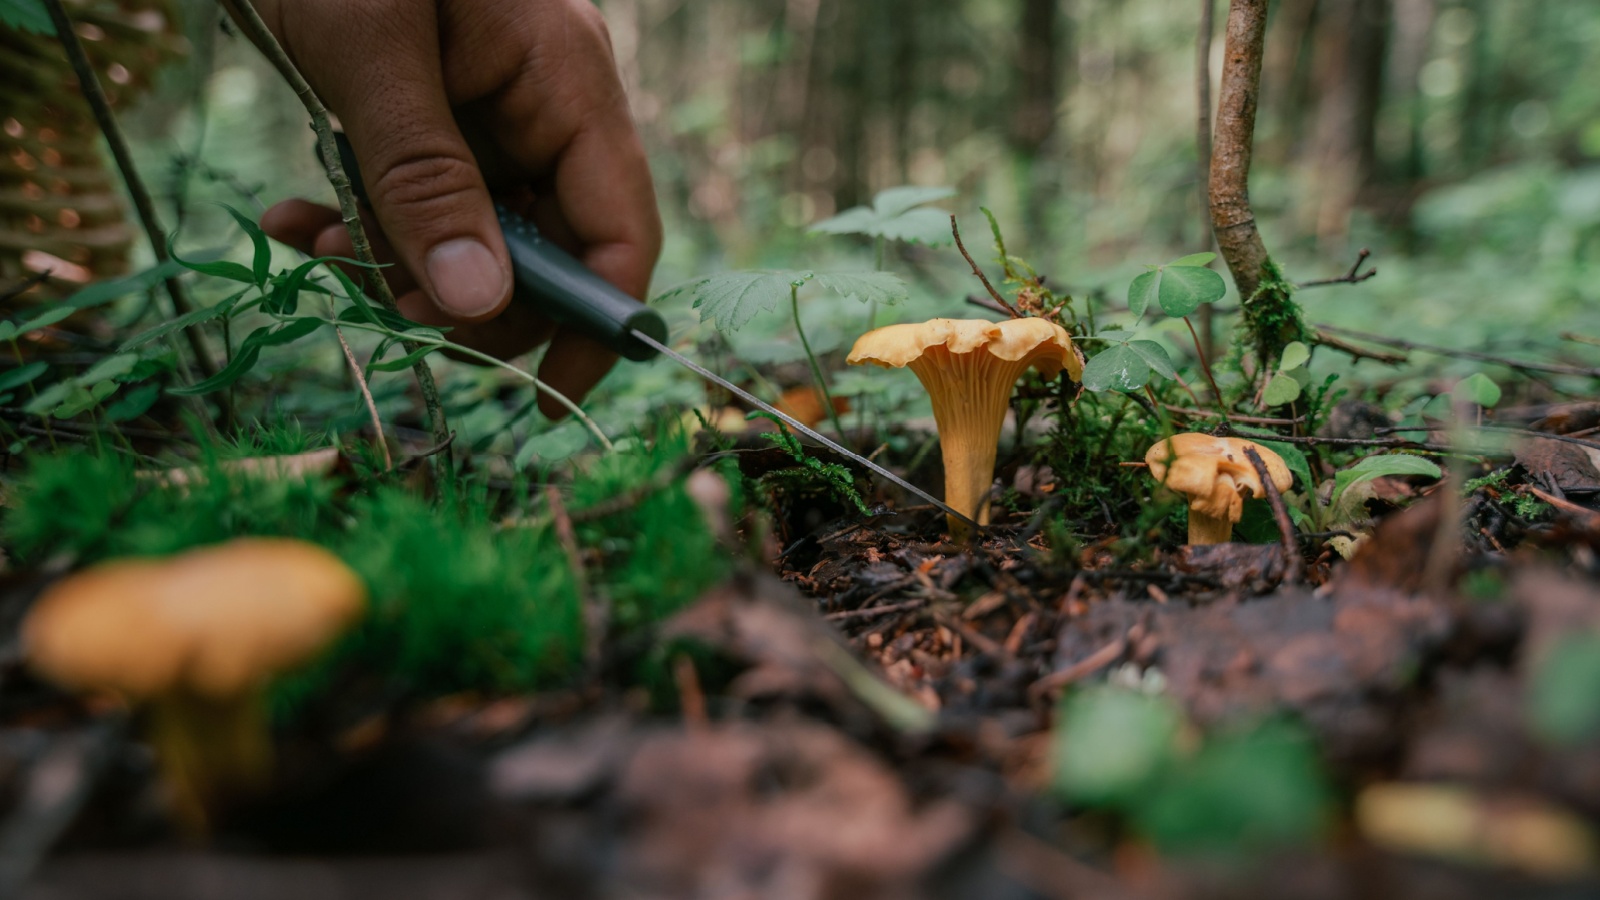 Mushroom picking in season. Edible forest mushrooms, chanterelles grow in the grass, foraging